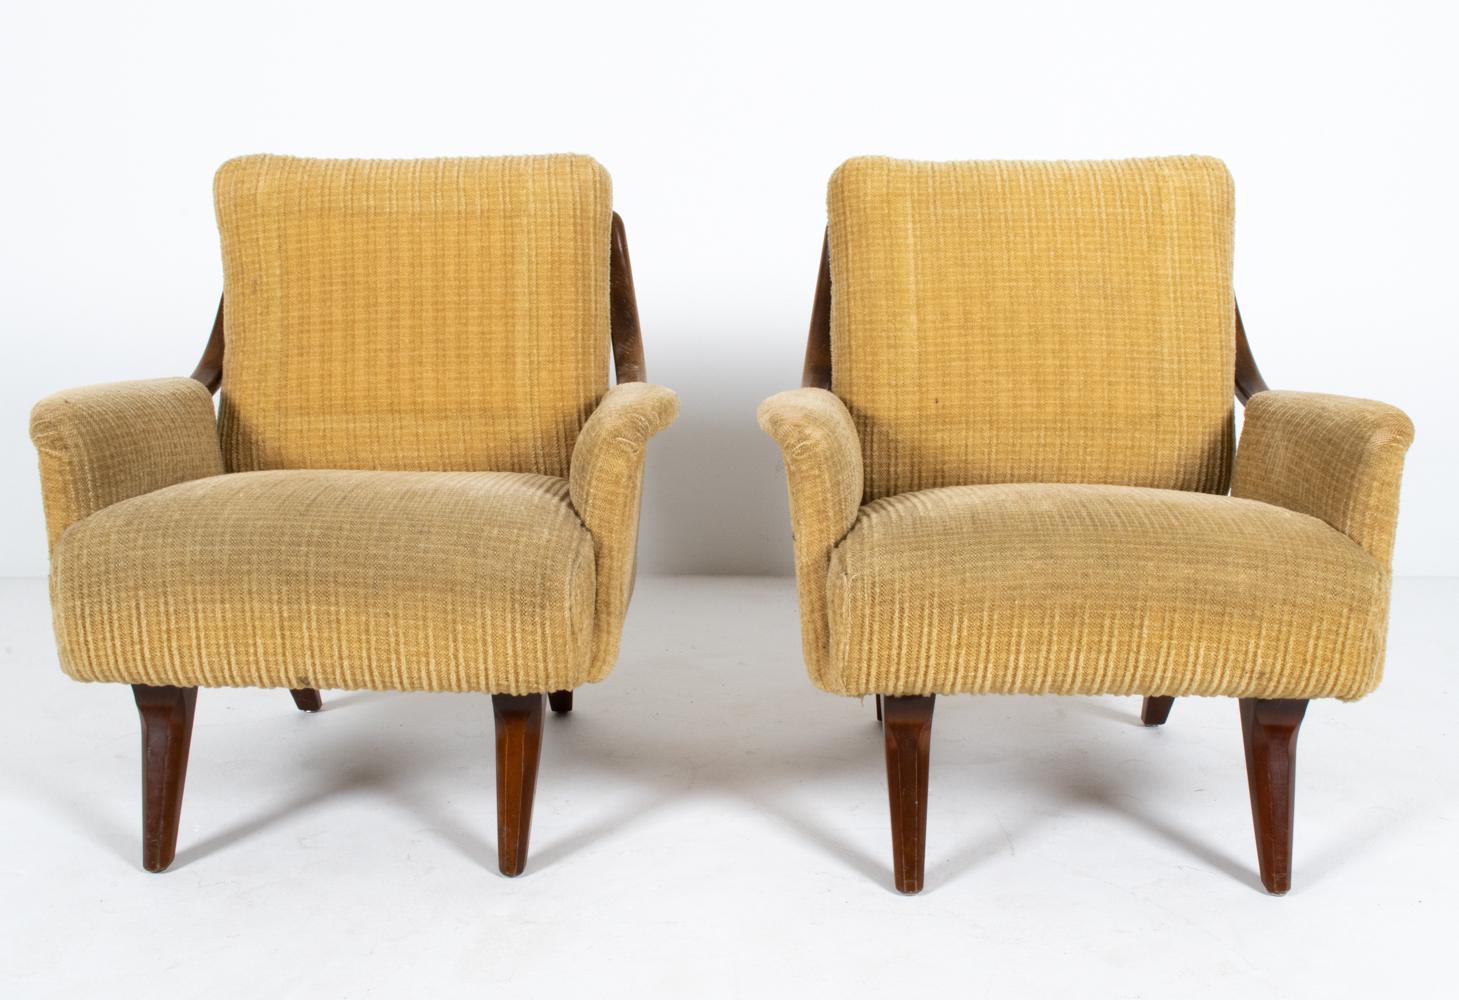 Pair of Scandinavian Mid-Century Lounge Chairs, c. 1950's In Good Condition For Sale In Norwalk, CT